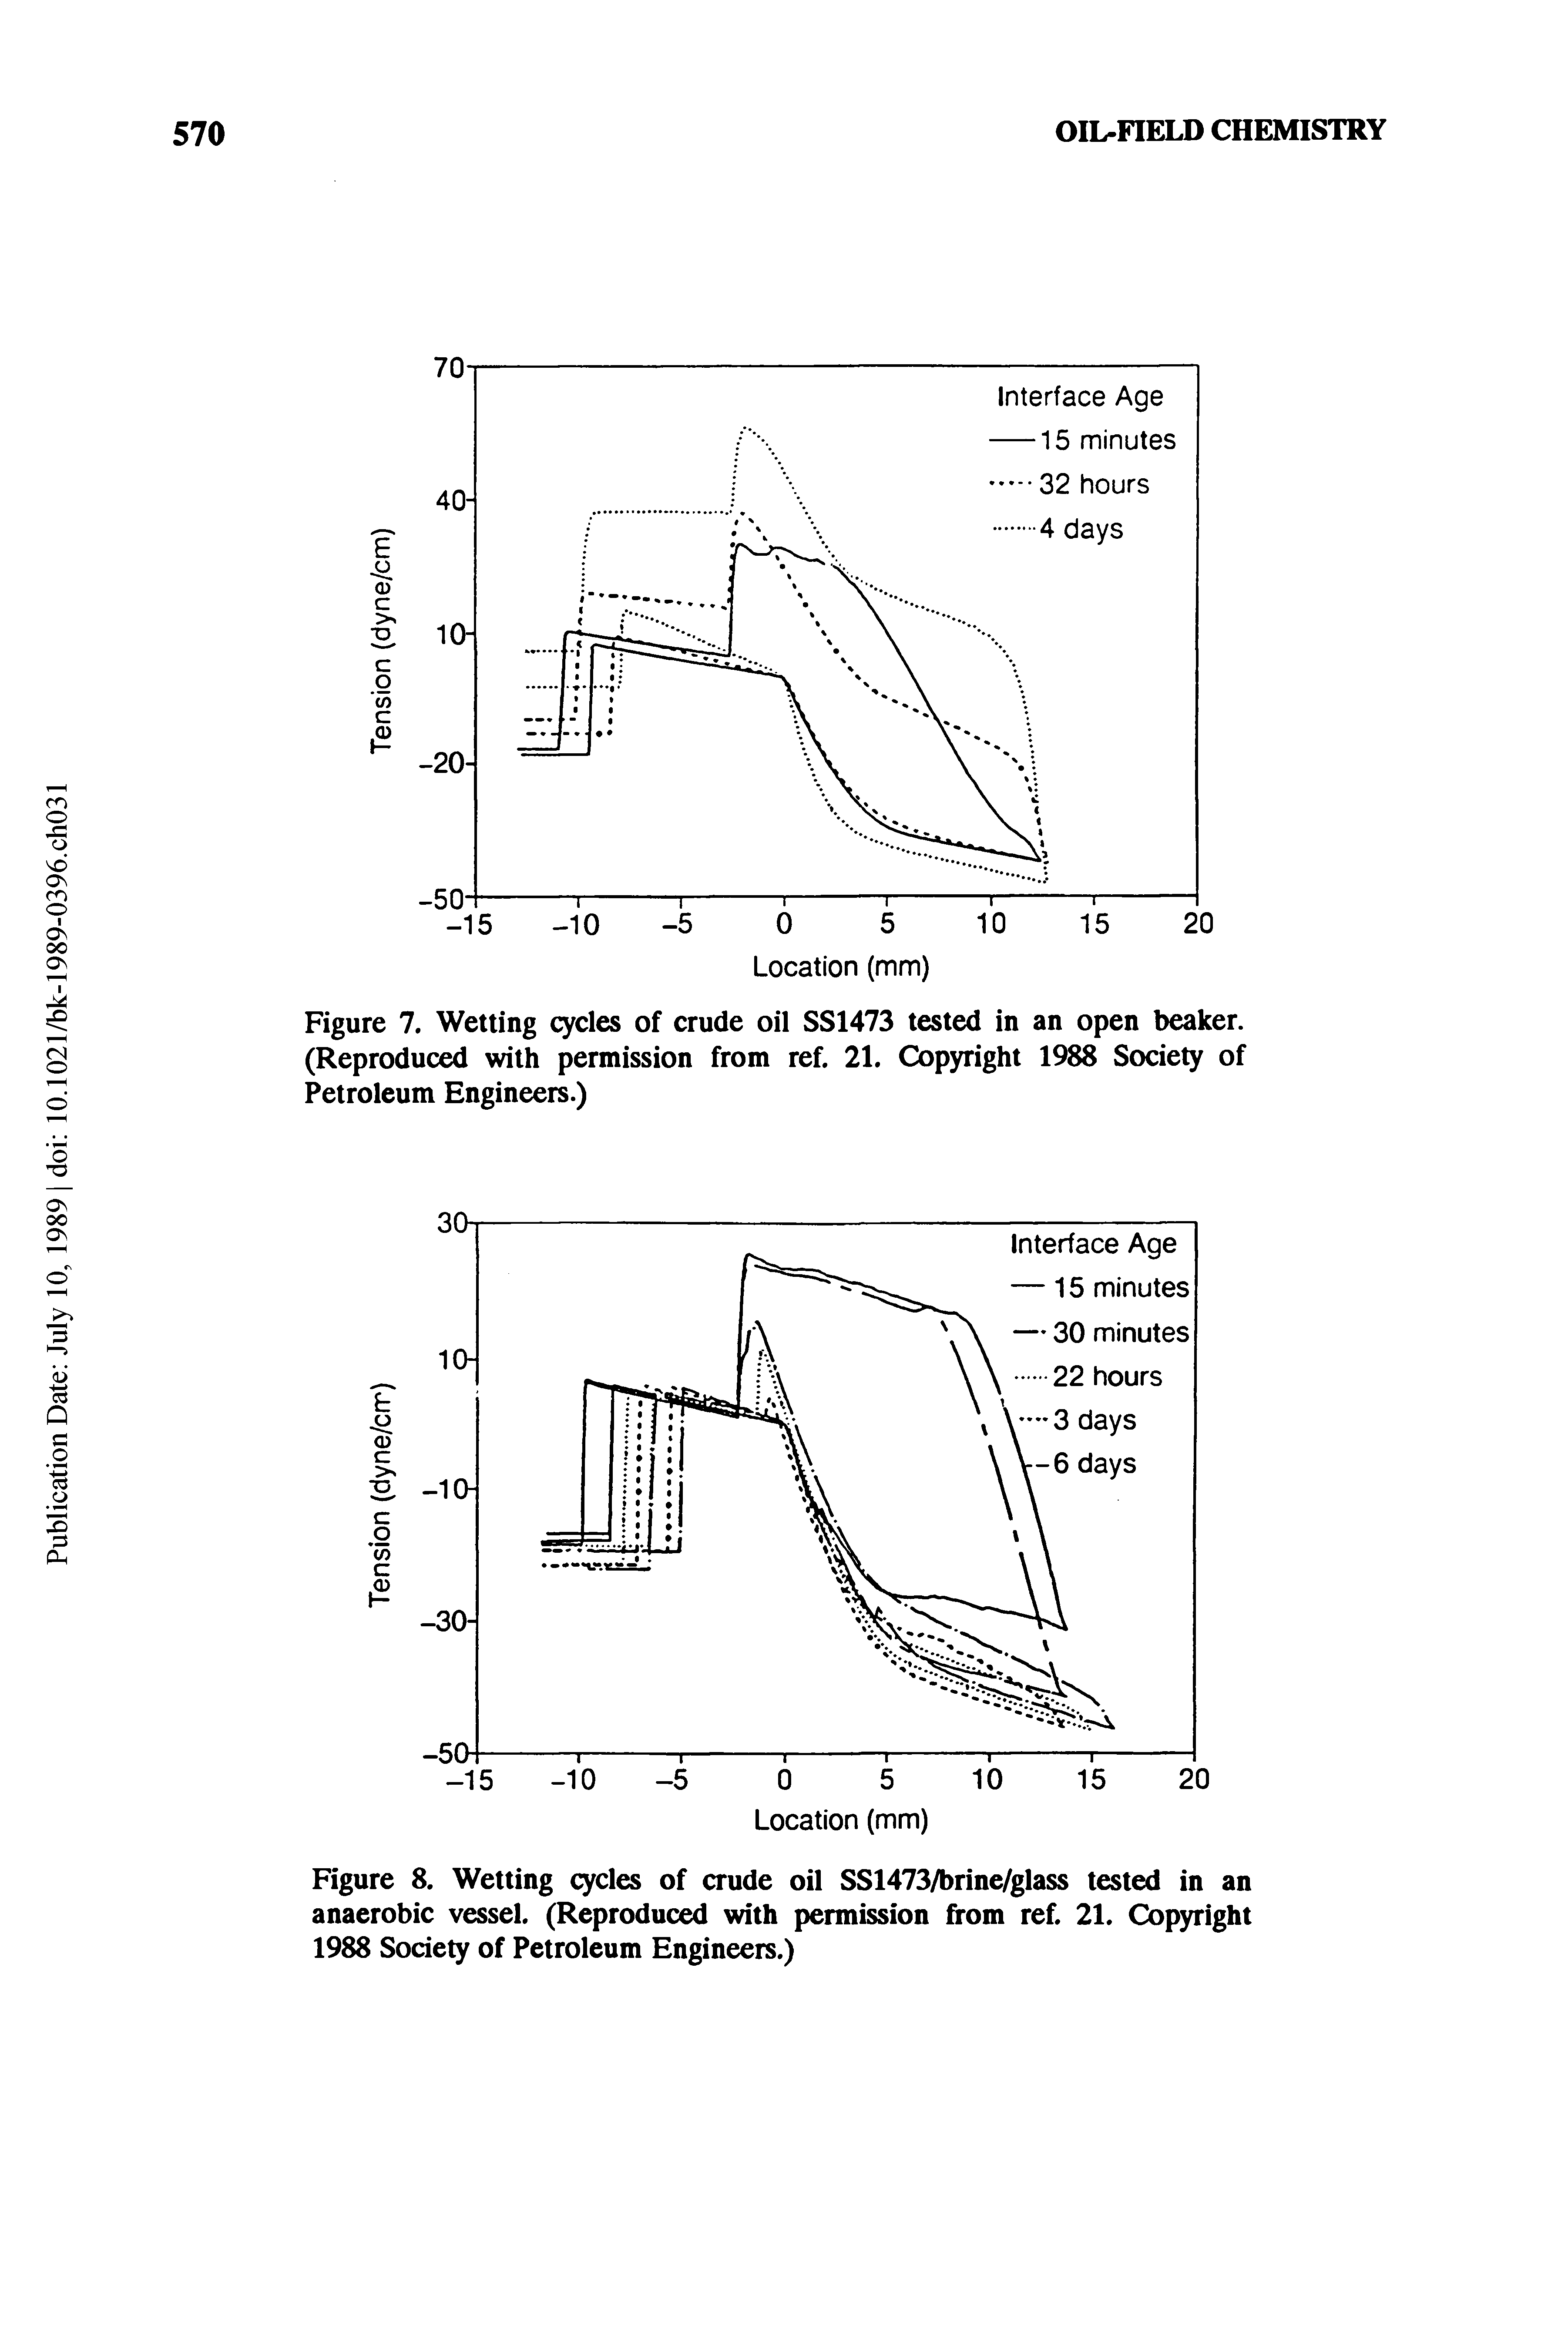 Figure 7. Wetting cycles of crude oil SS1473 tested in an open beaker. (Reproduced with permission from ref. 21. Copyright 1988 Society of Petroleum Engineers.)...